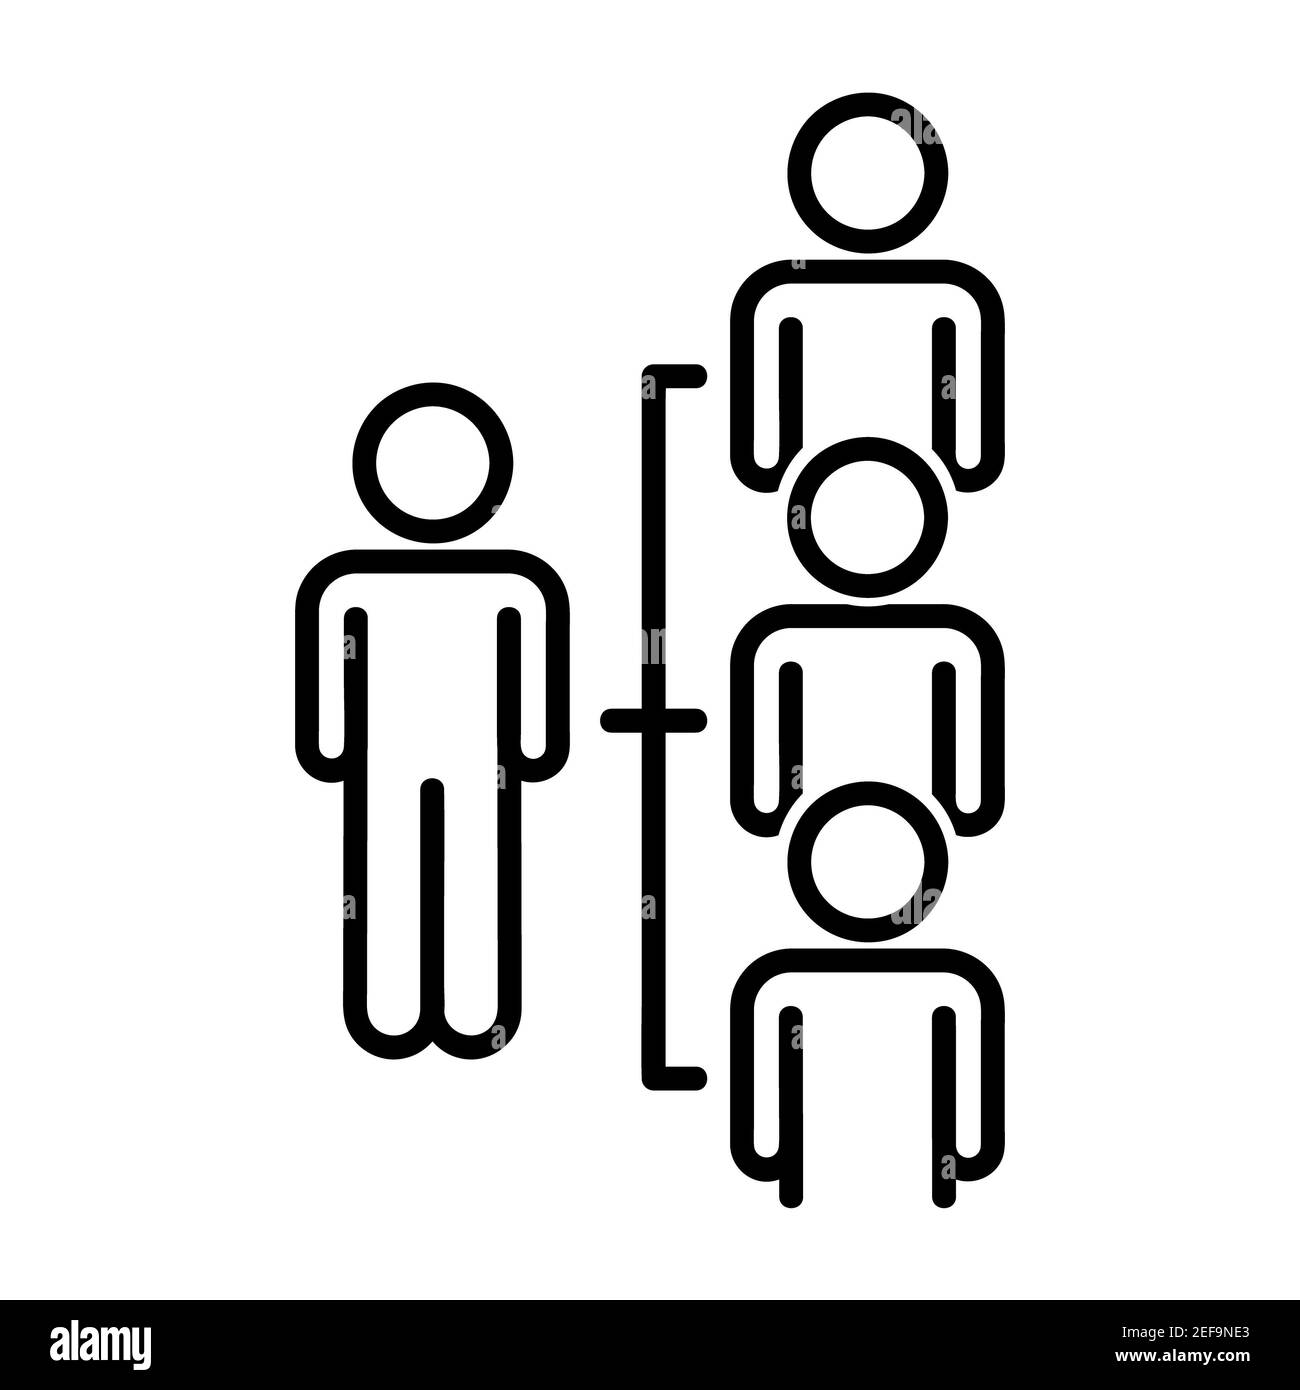 Business hierarchy tree flat icon. Pictogram for web. Line stroke. Isolated on white background. Vector eps10. Group of people who communicate in dial Stock Photo